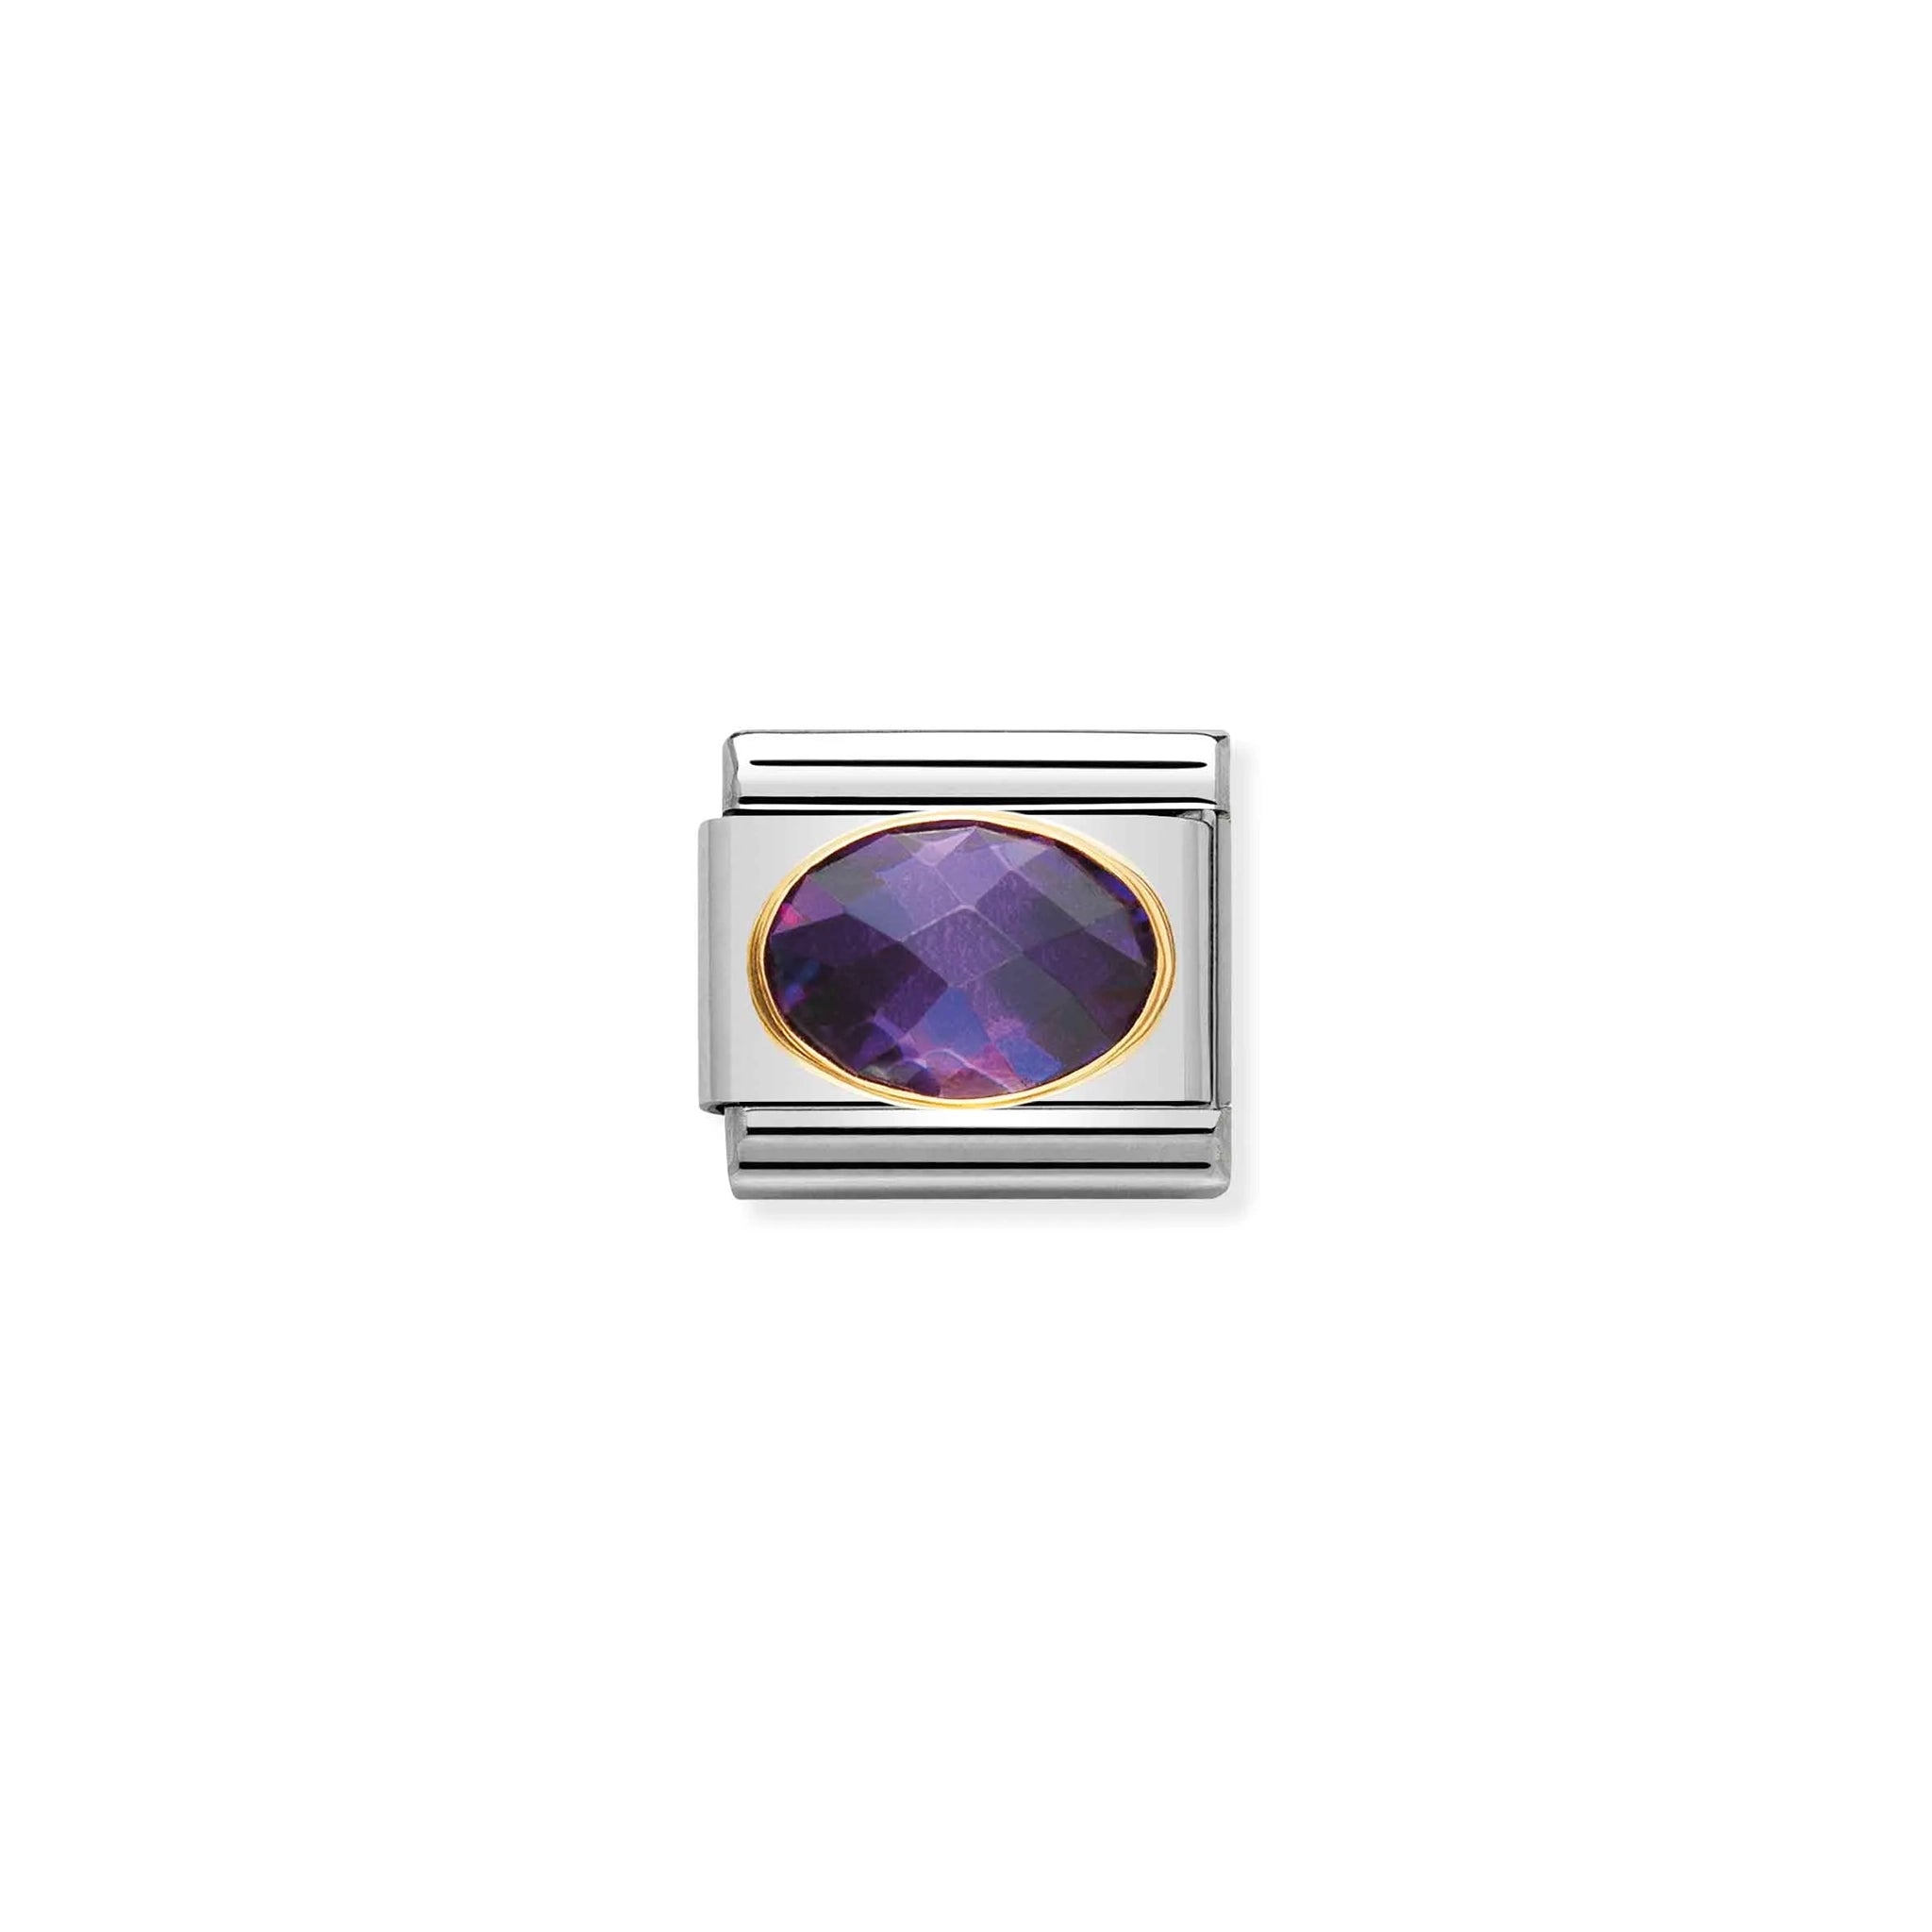 Nomination charm link featuring a faceted oval purple cubic zirconia stone with gold surround